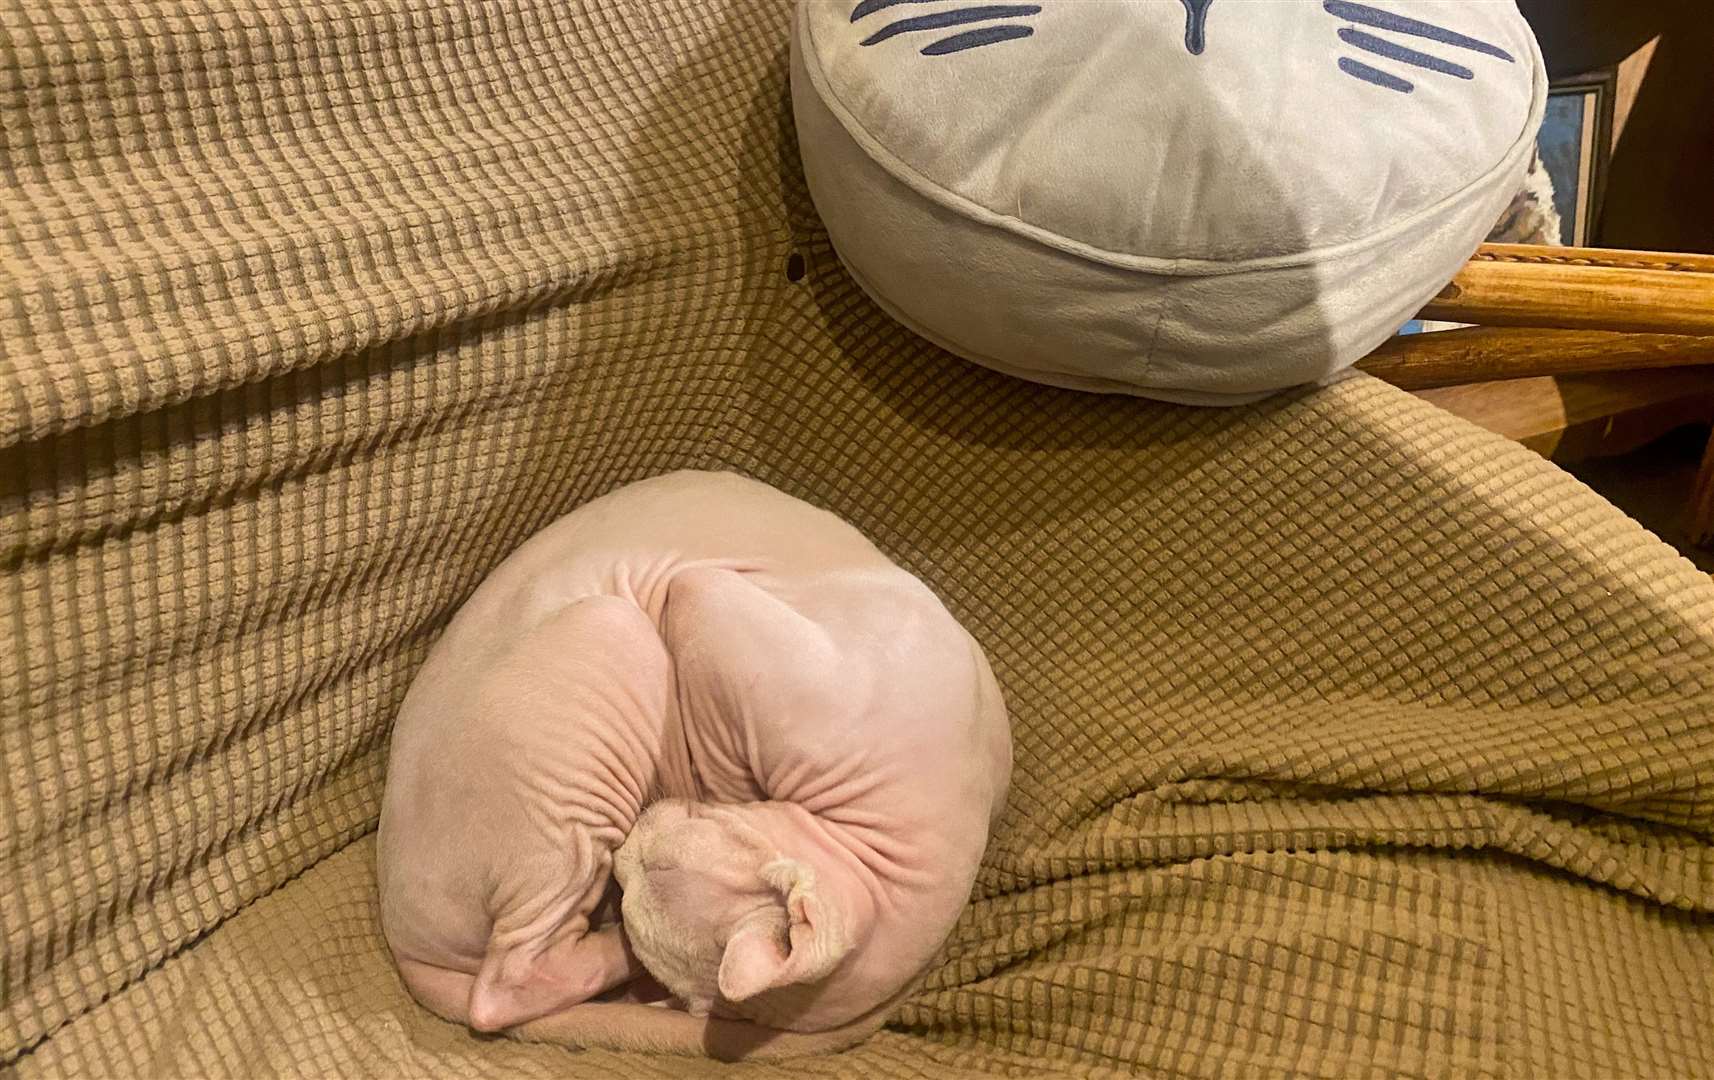 Sphynx cat Garibaldie was the first hairless cat I’d ever met and he was a sweetheart